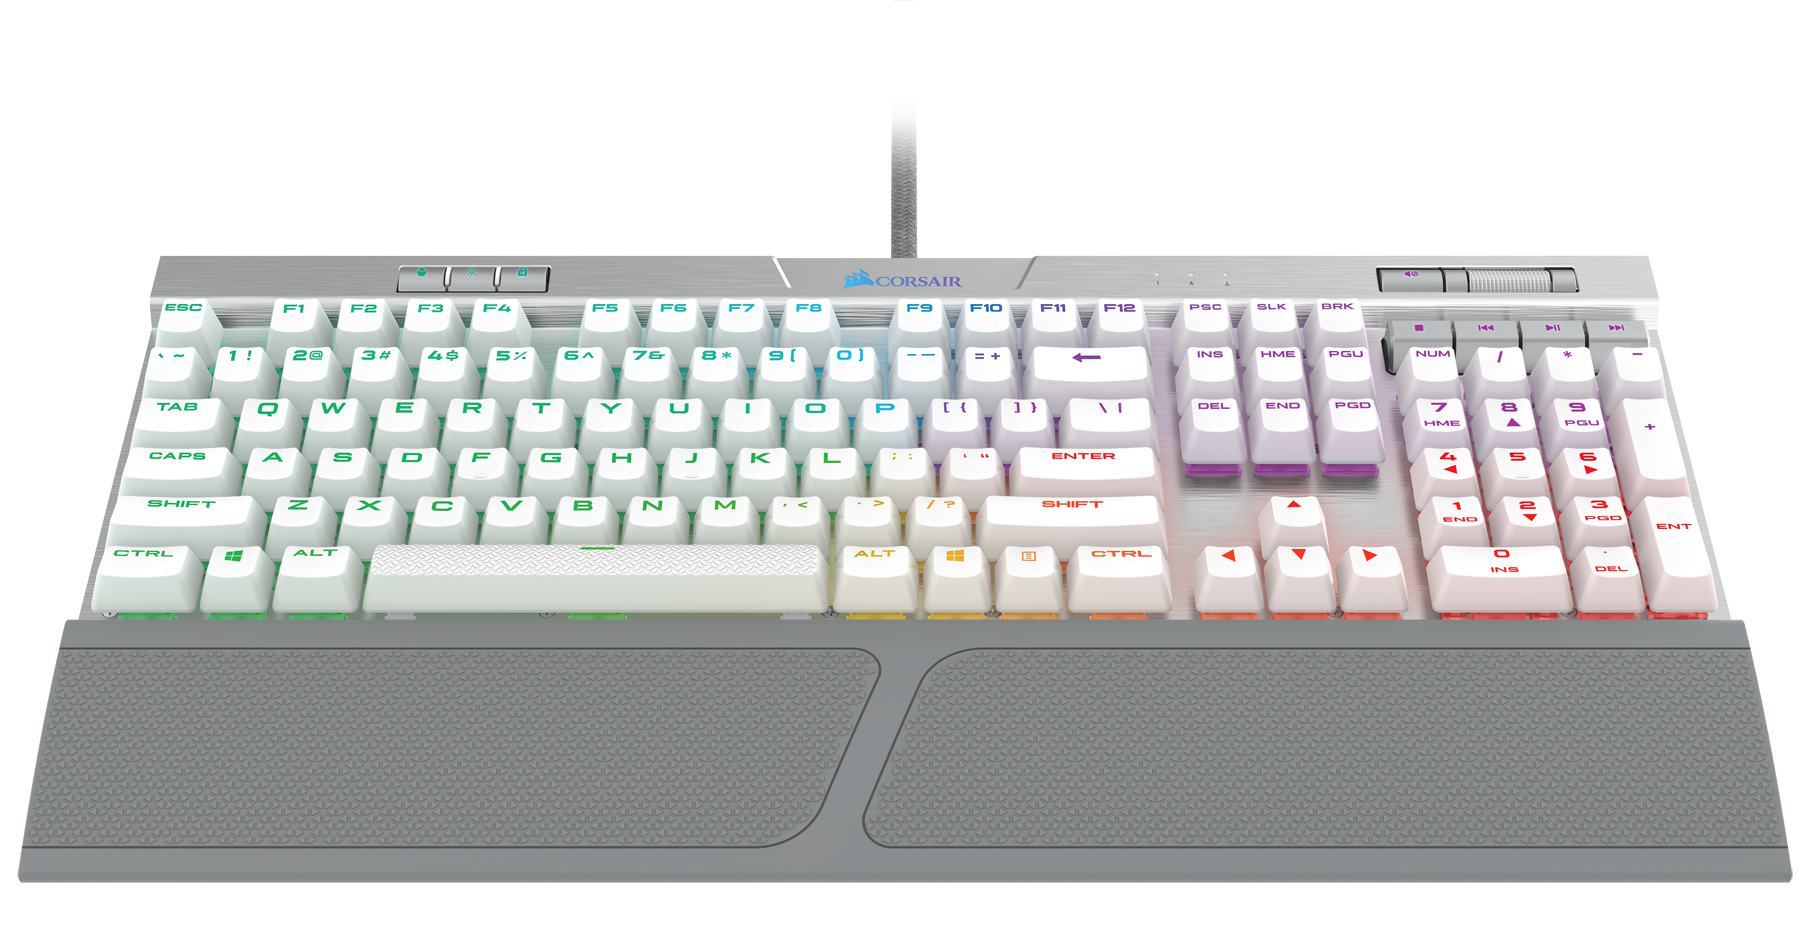 Corsair K70 RGB MK.2 SE Cherry MX Speed Mechanical Gaming Keyboard with RGB  LED Backlit and White PBT Keycaps - CH-9109114-NA